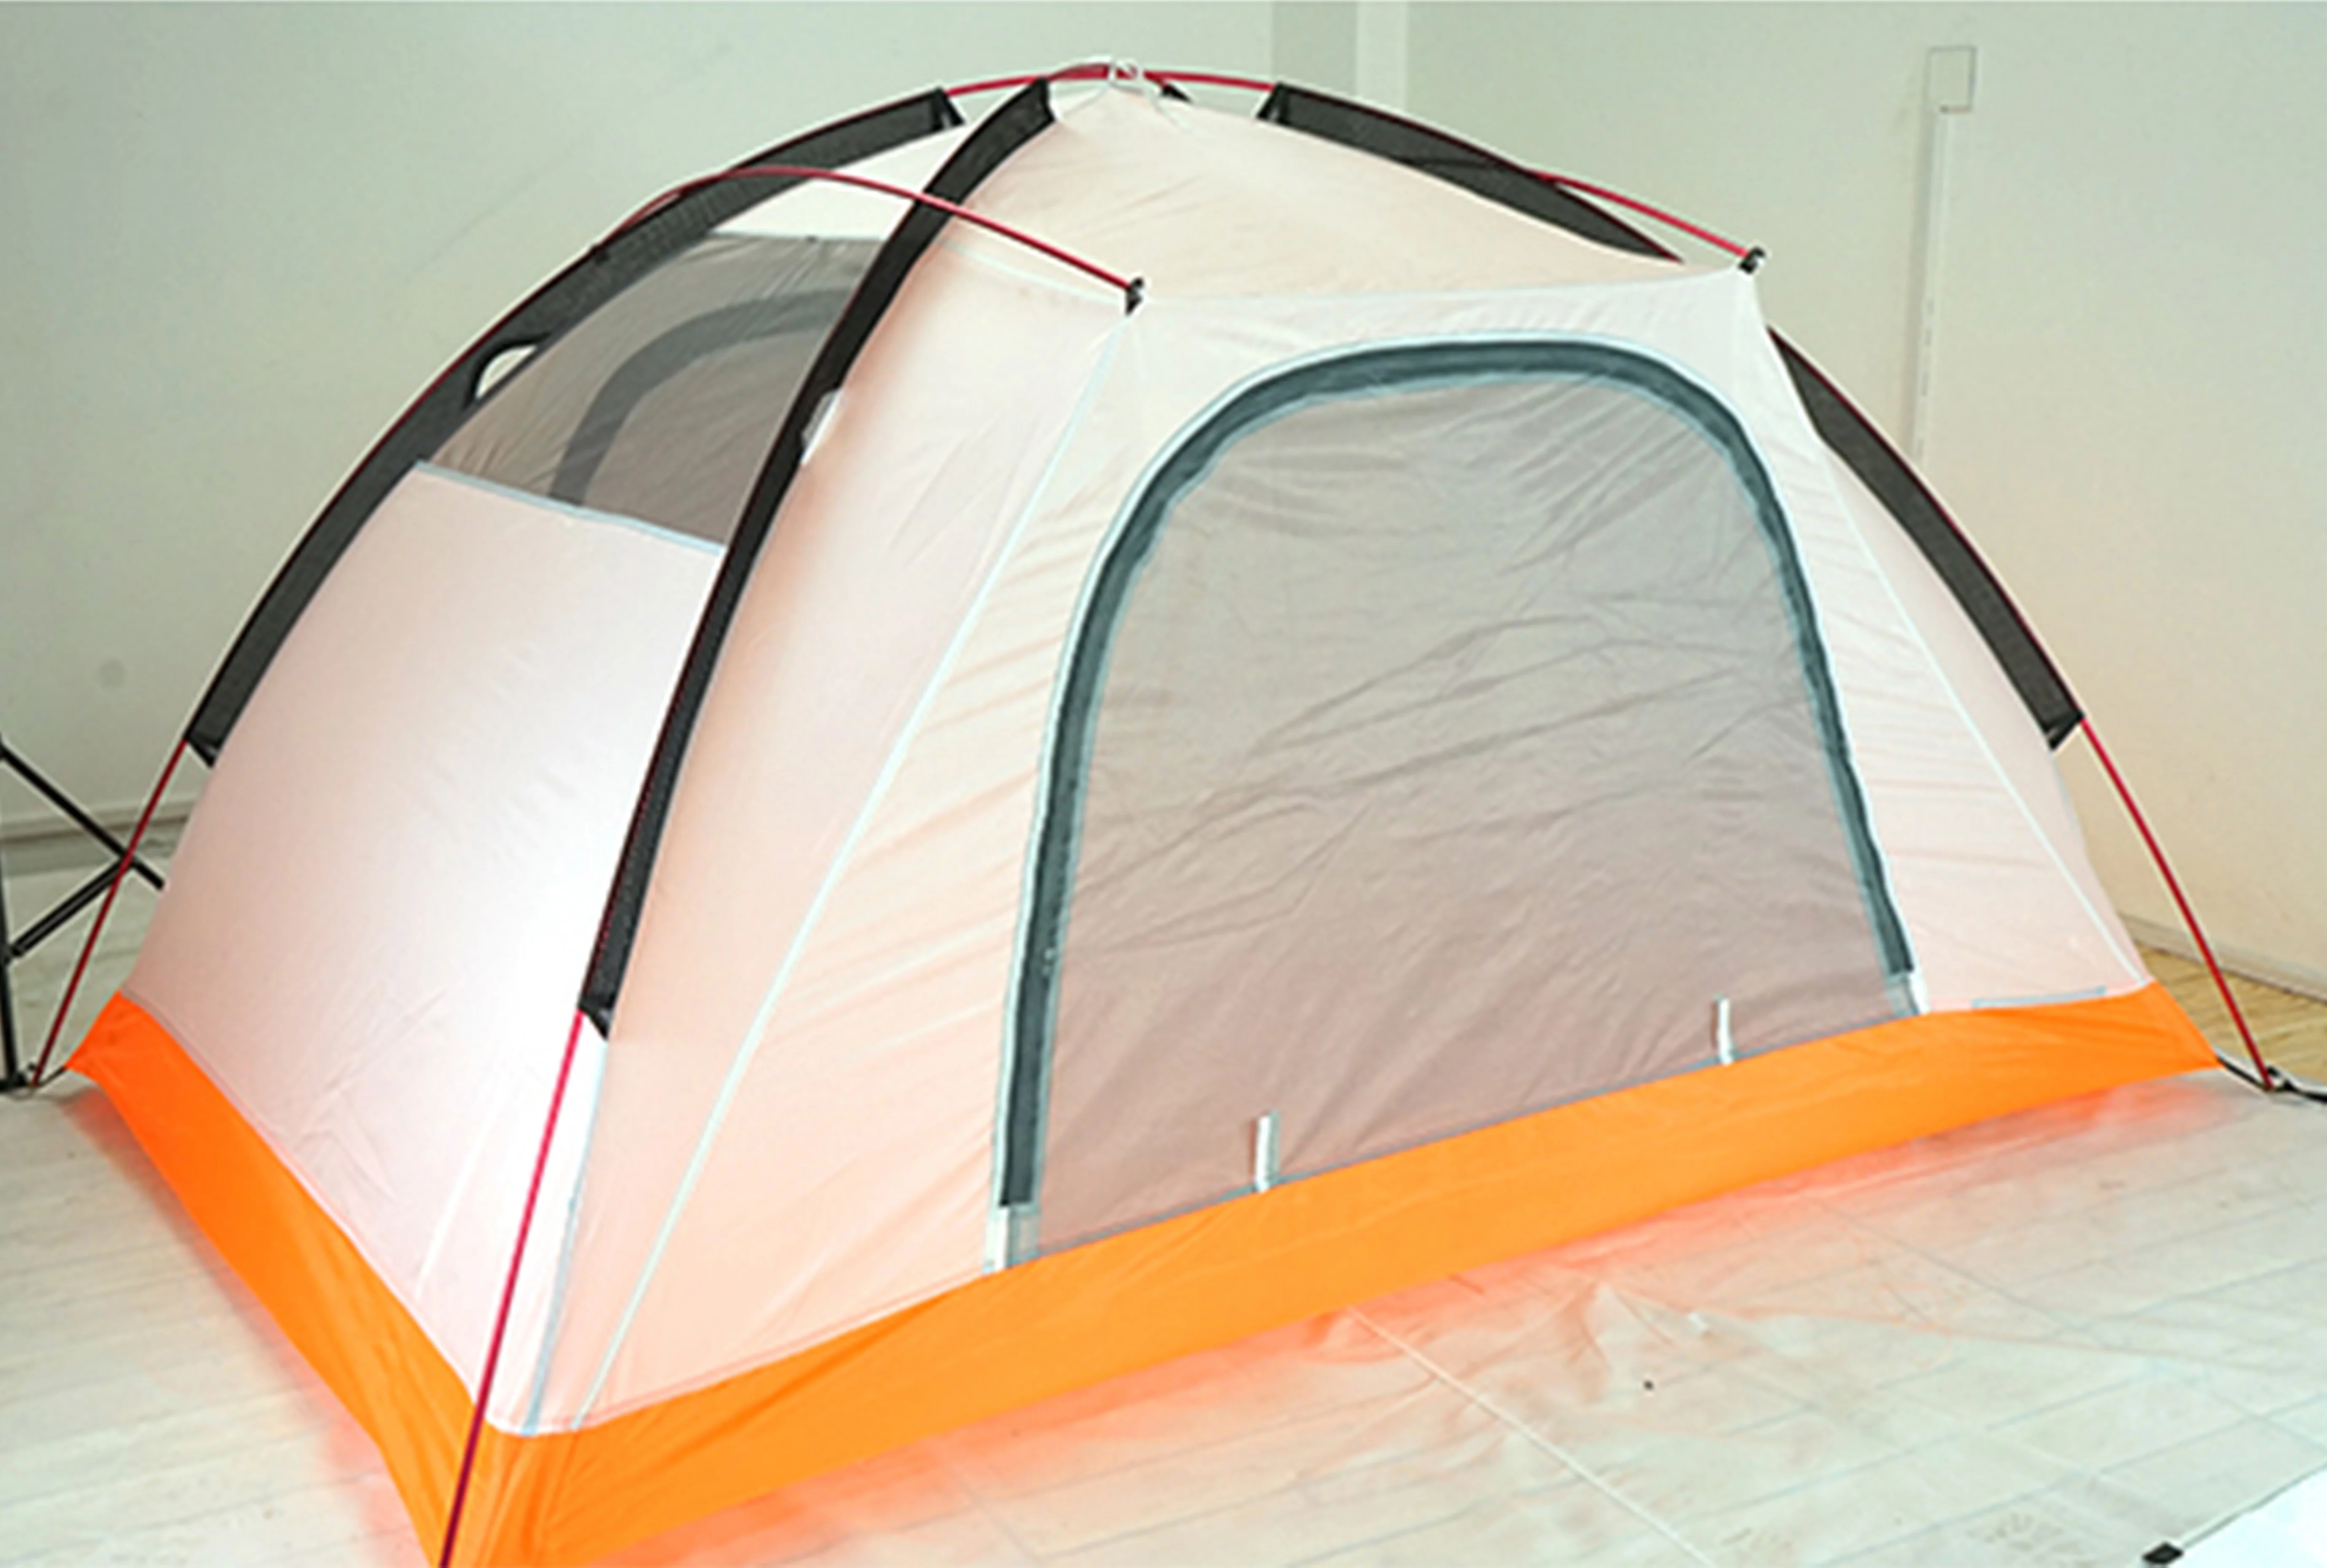 High-end Ultralight 2 Person Bacpacking tent for 4 Season,CZX-421 Double Layers 2 Person 4 Season Camping Tent,2 Person Tent